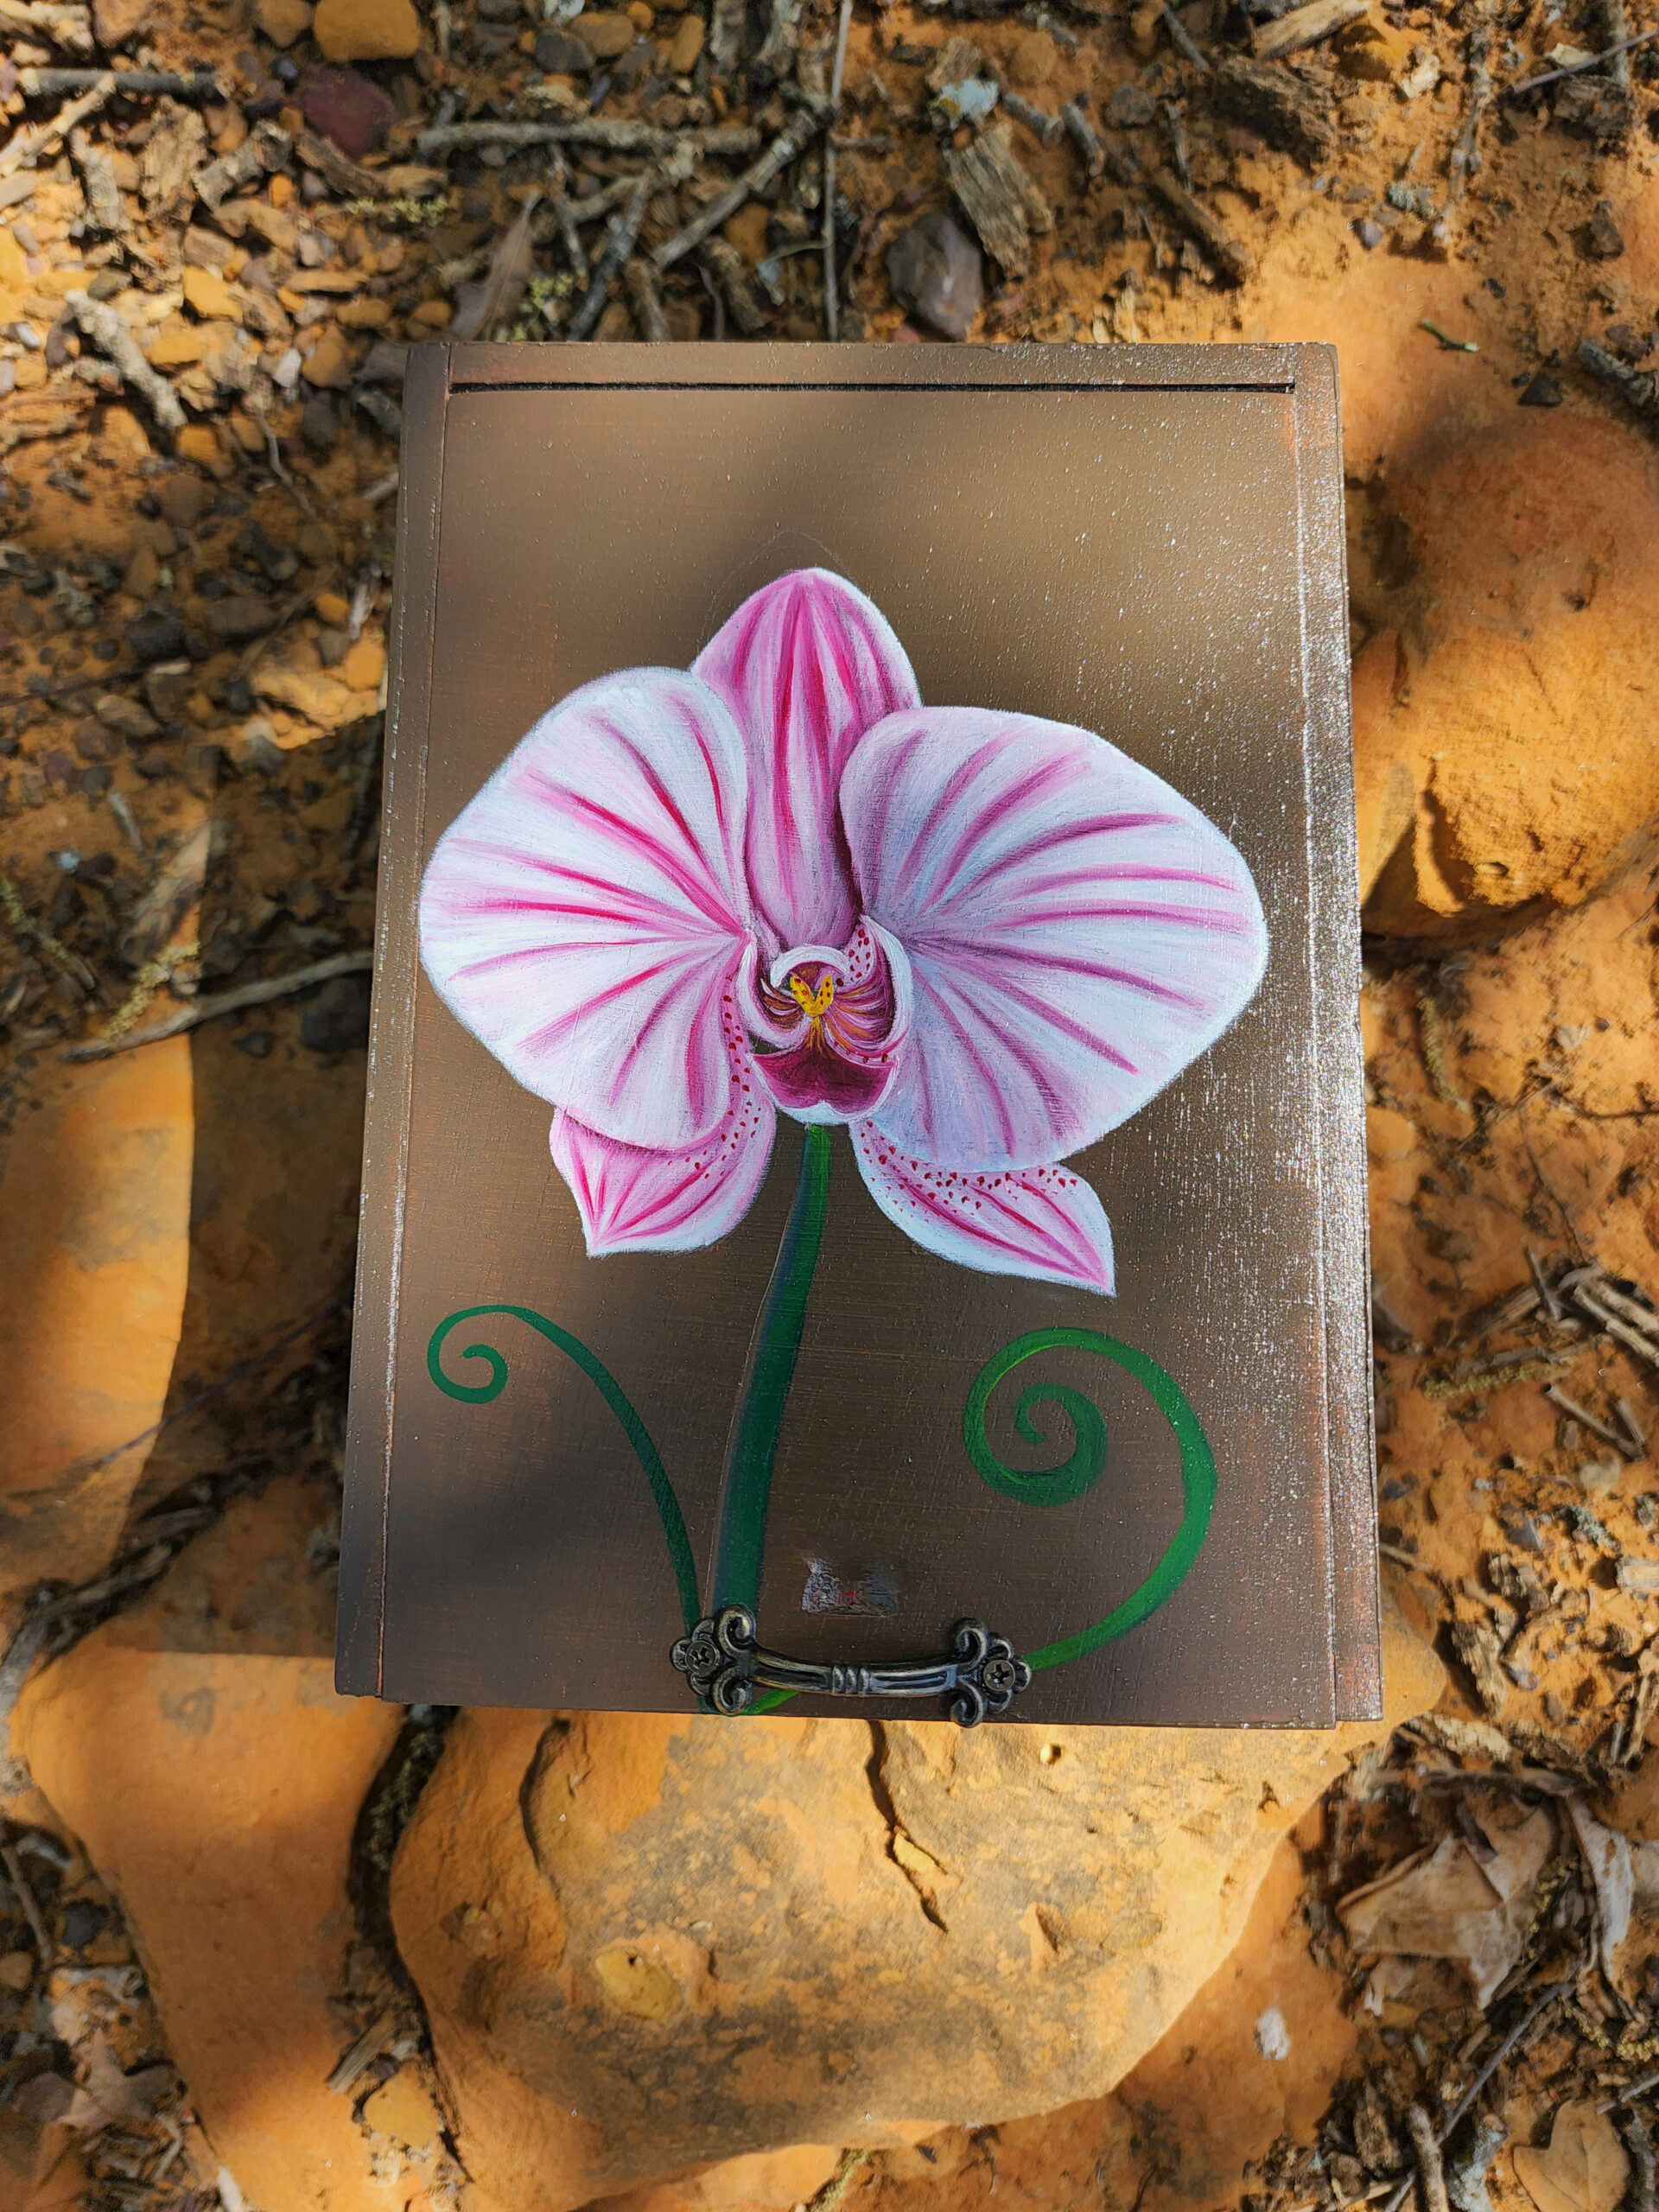 This is one of a kind handpainted wood trinket box with layers of felt inside and in the base, has metal feet and a handle. This cute trinket box is an ideal gift for a special loved one. You can store jewelry such as rings, necklaces, bracelets, or anything you would like to keep in a particular place, especially in this elegant and artistic trinket box.